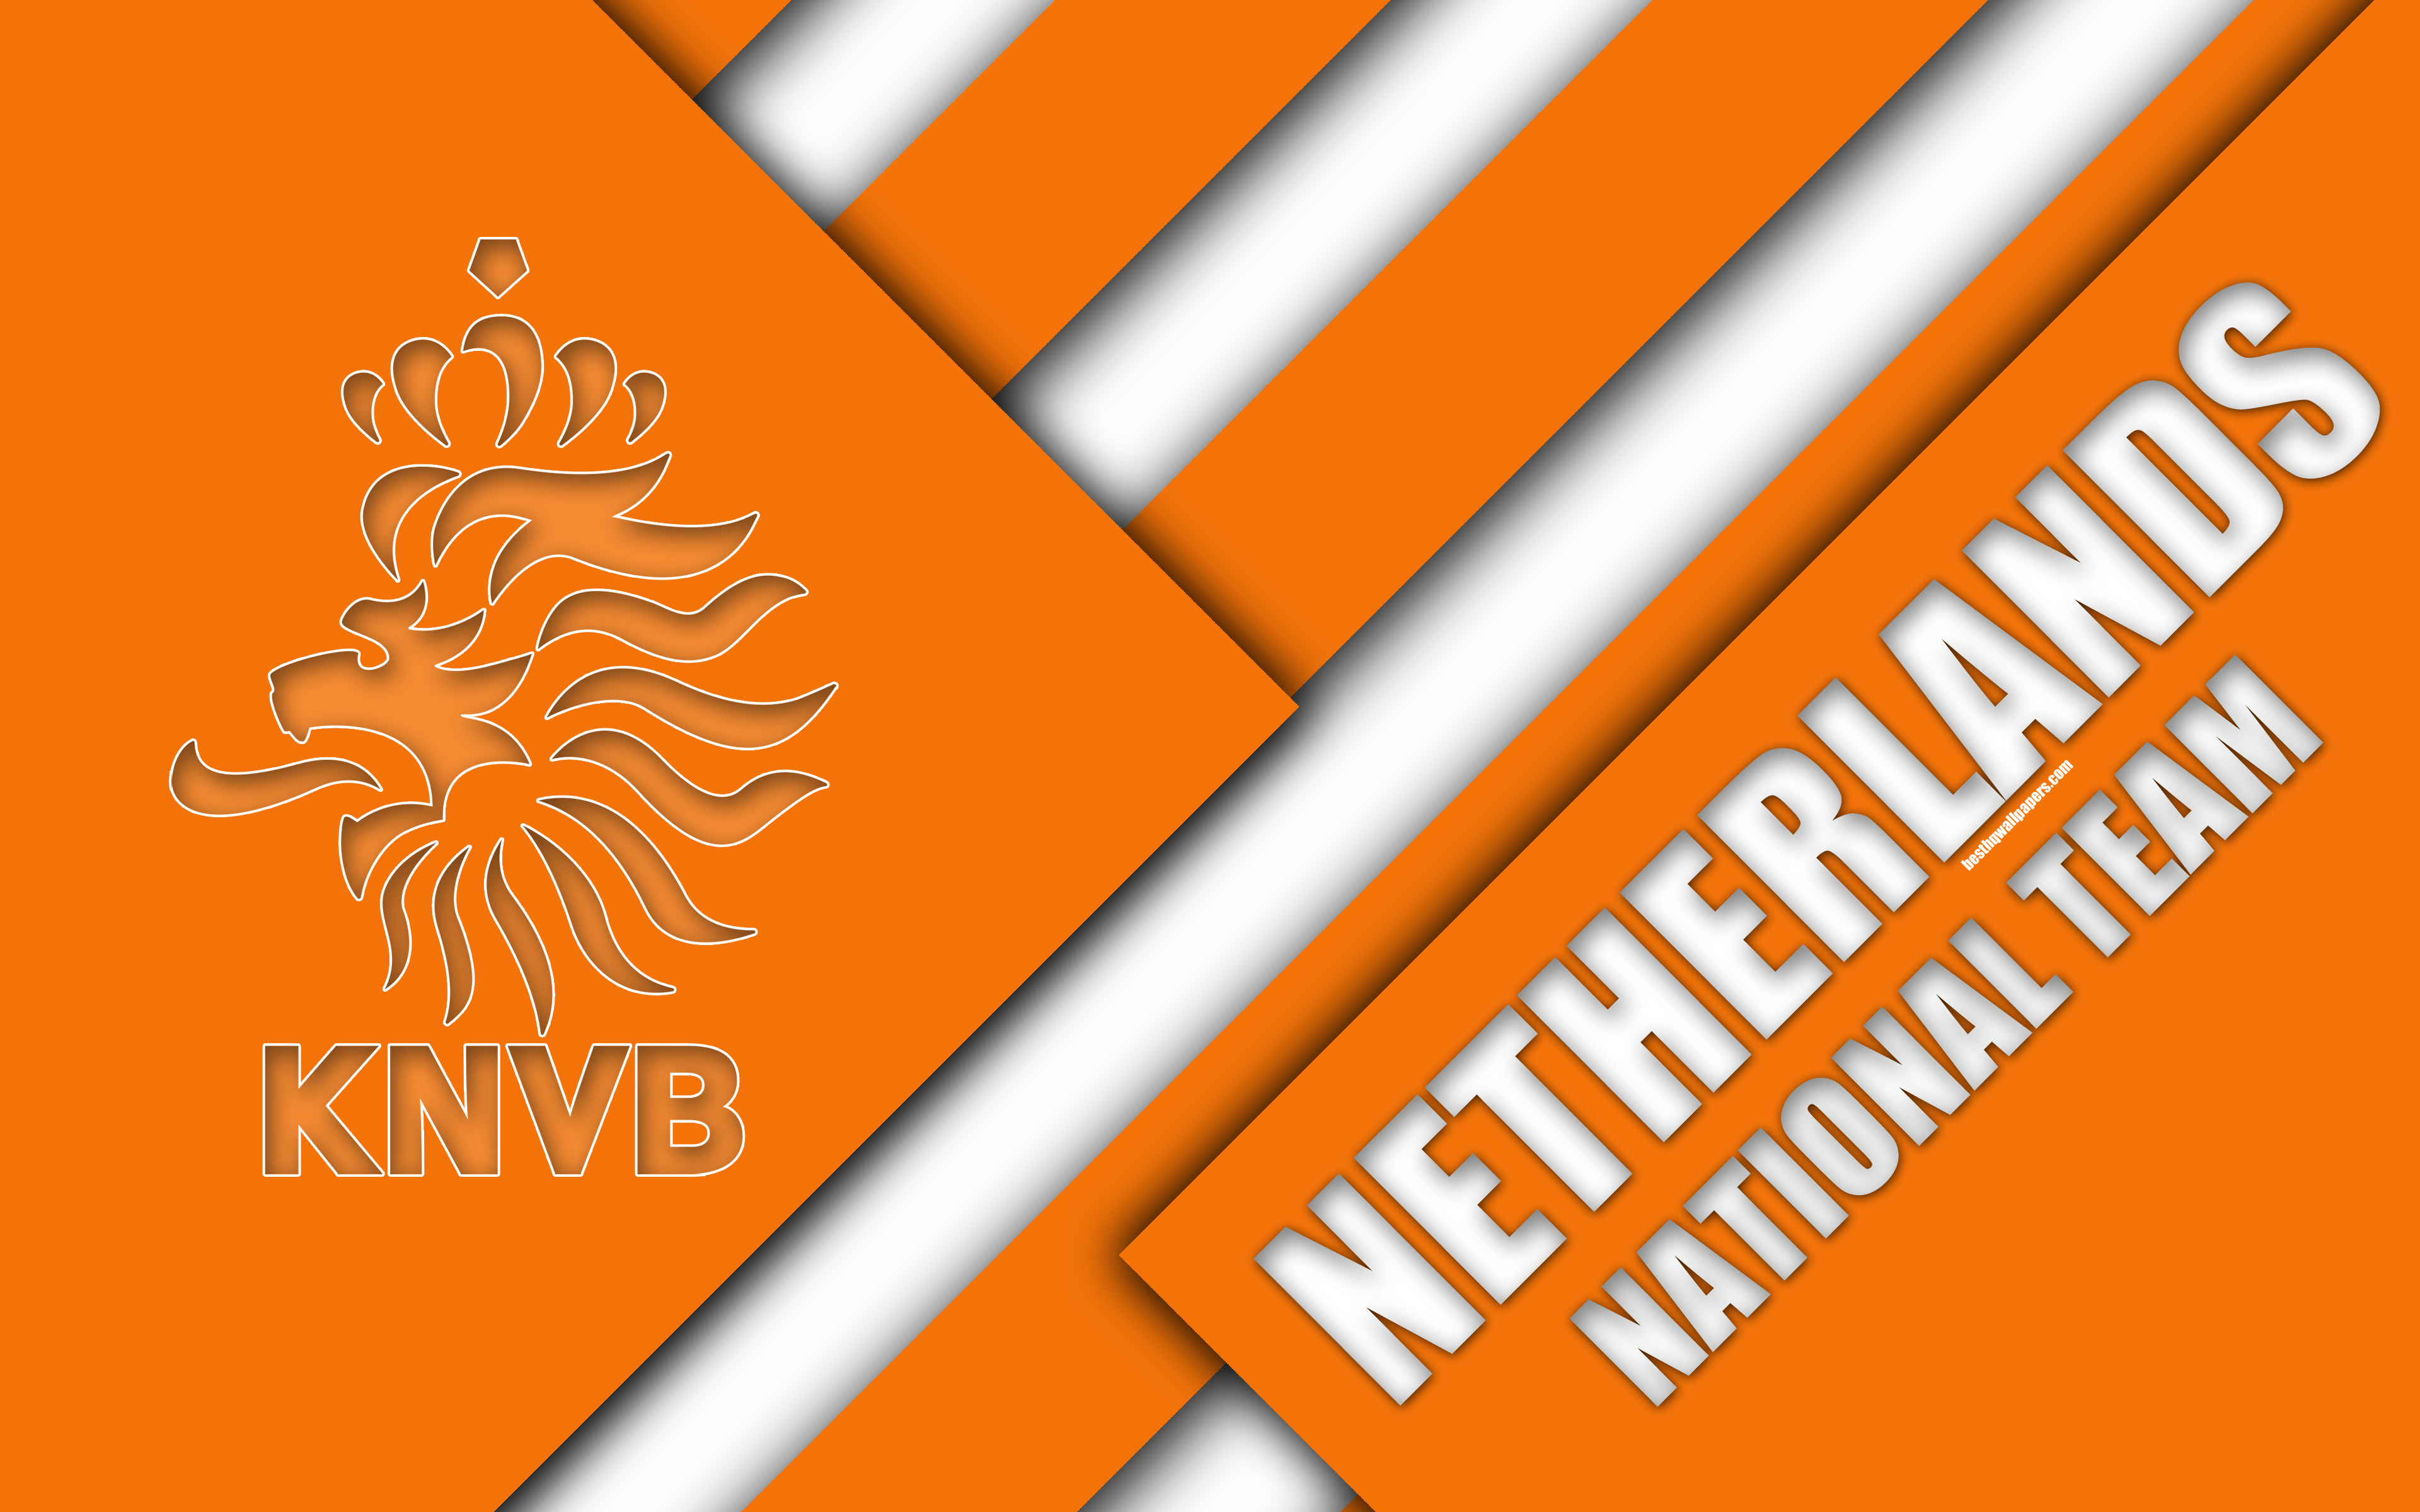 KNVB Background wallpaper by JoeyCreate - Download on ZEDGE™